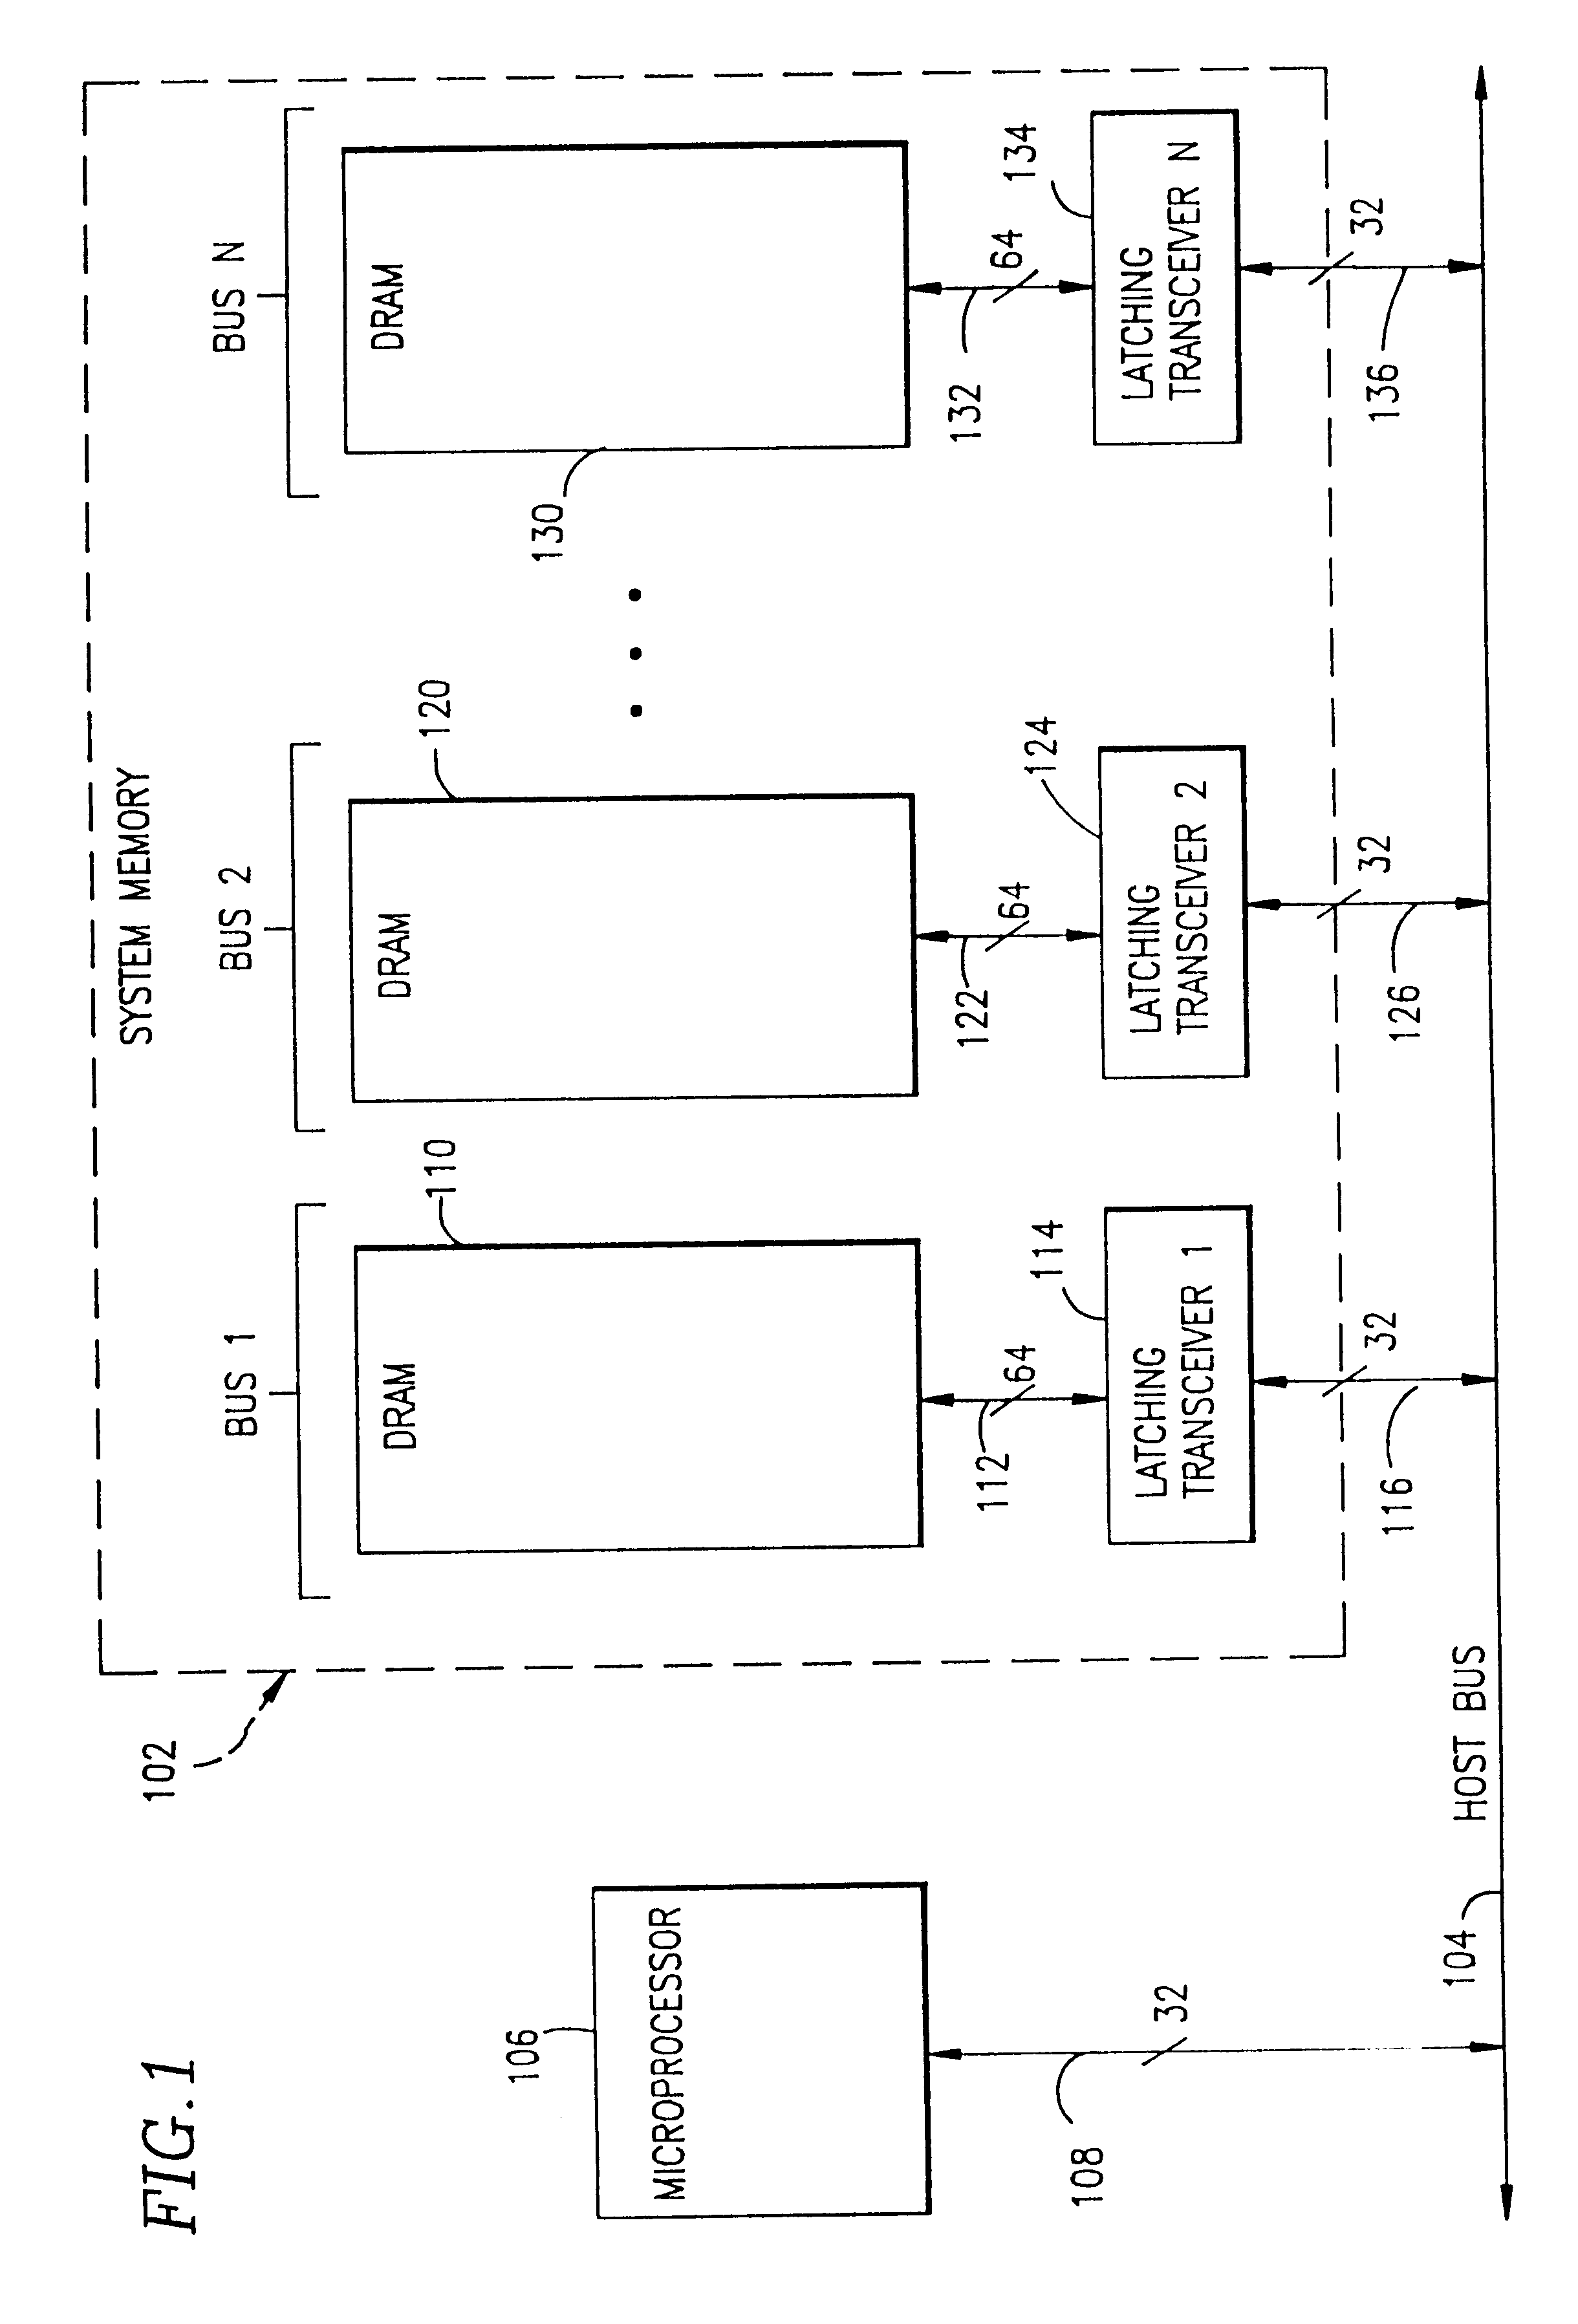 System and method for accessing data between a host bus and a system memory bus where the system memory bus has a data path that is twice the width of the data path for the host bus